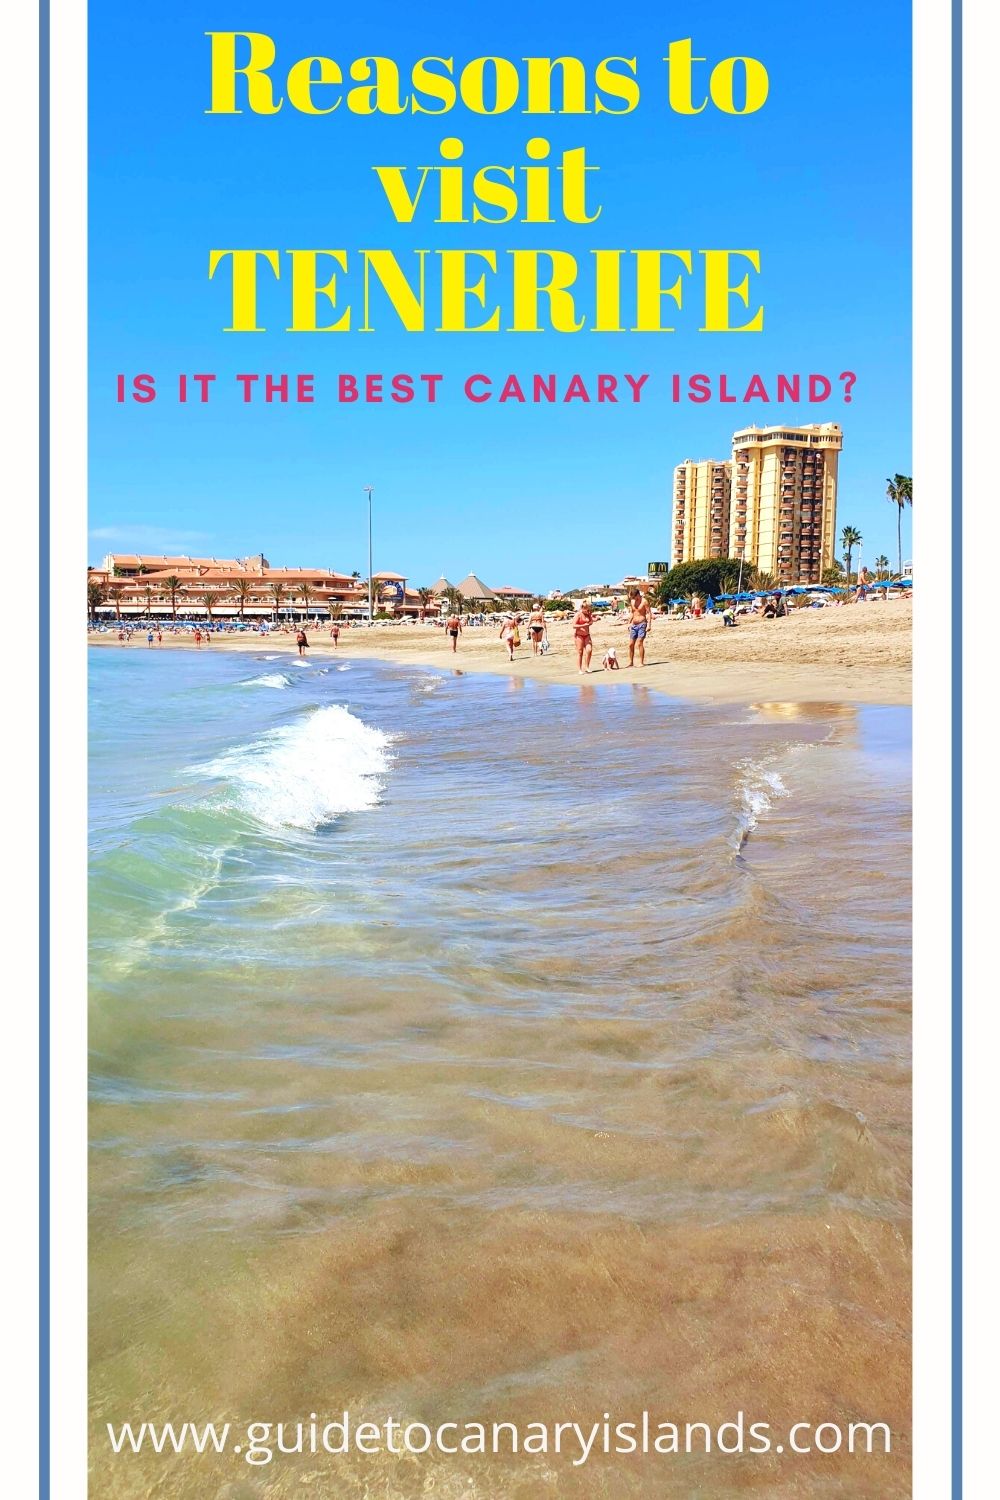 Is Tenerife Worth Visiting? - Our Top 10 Reasons To Visit Tenerife